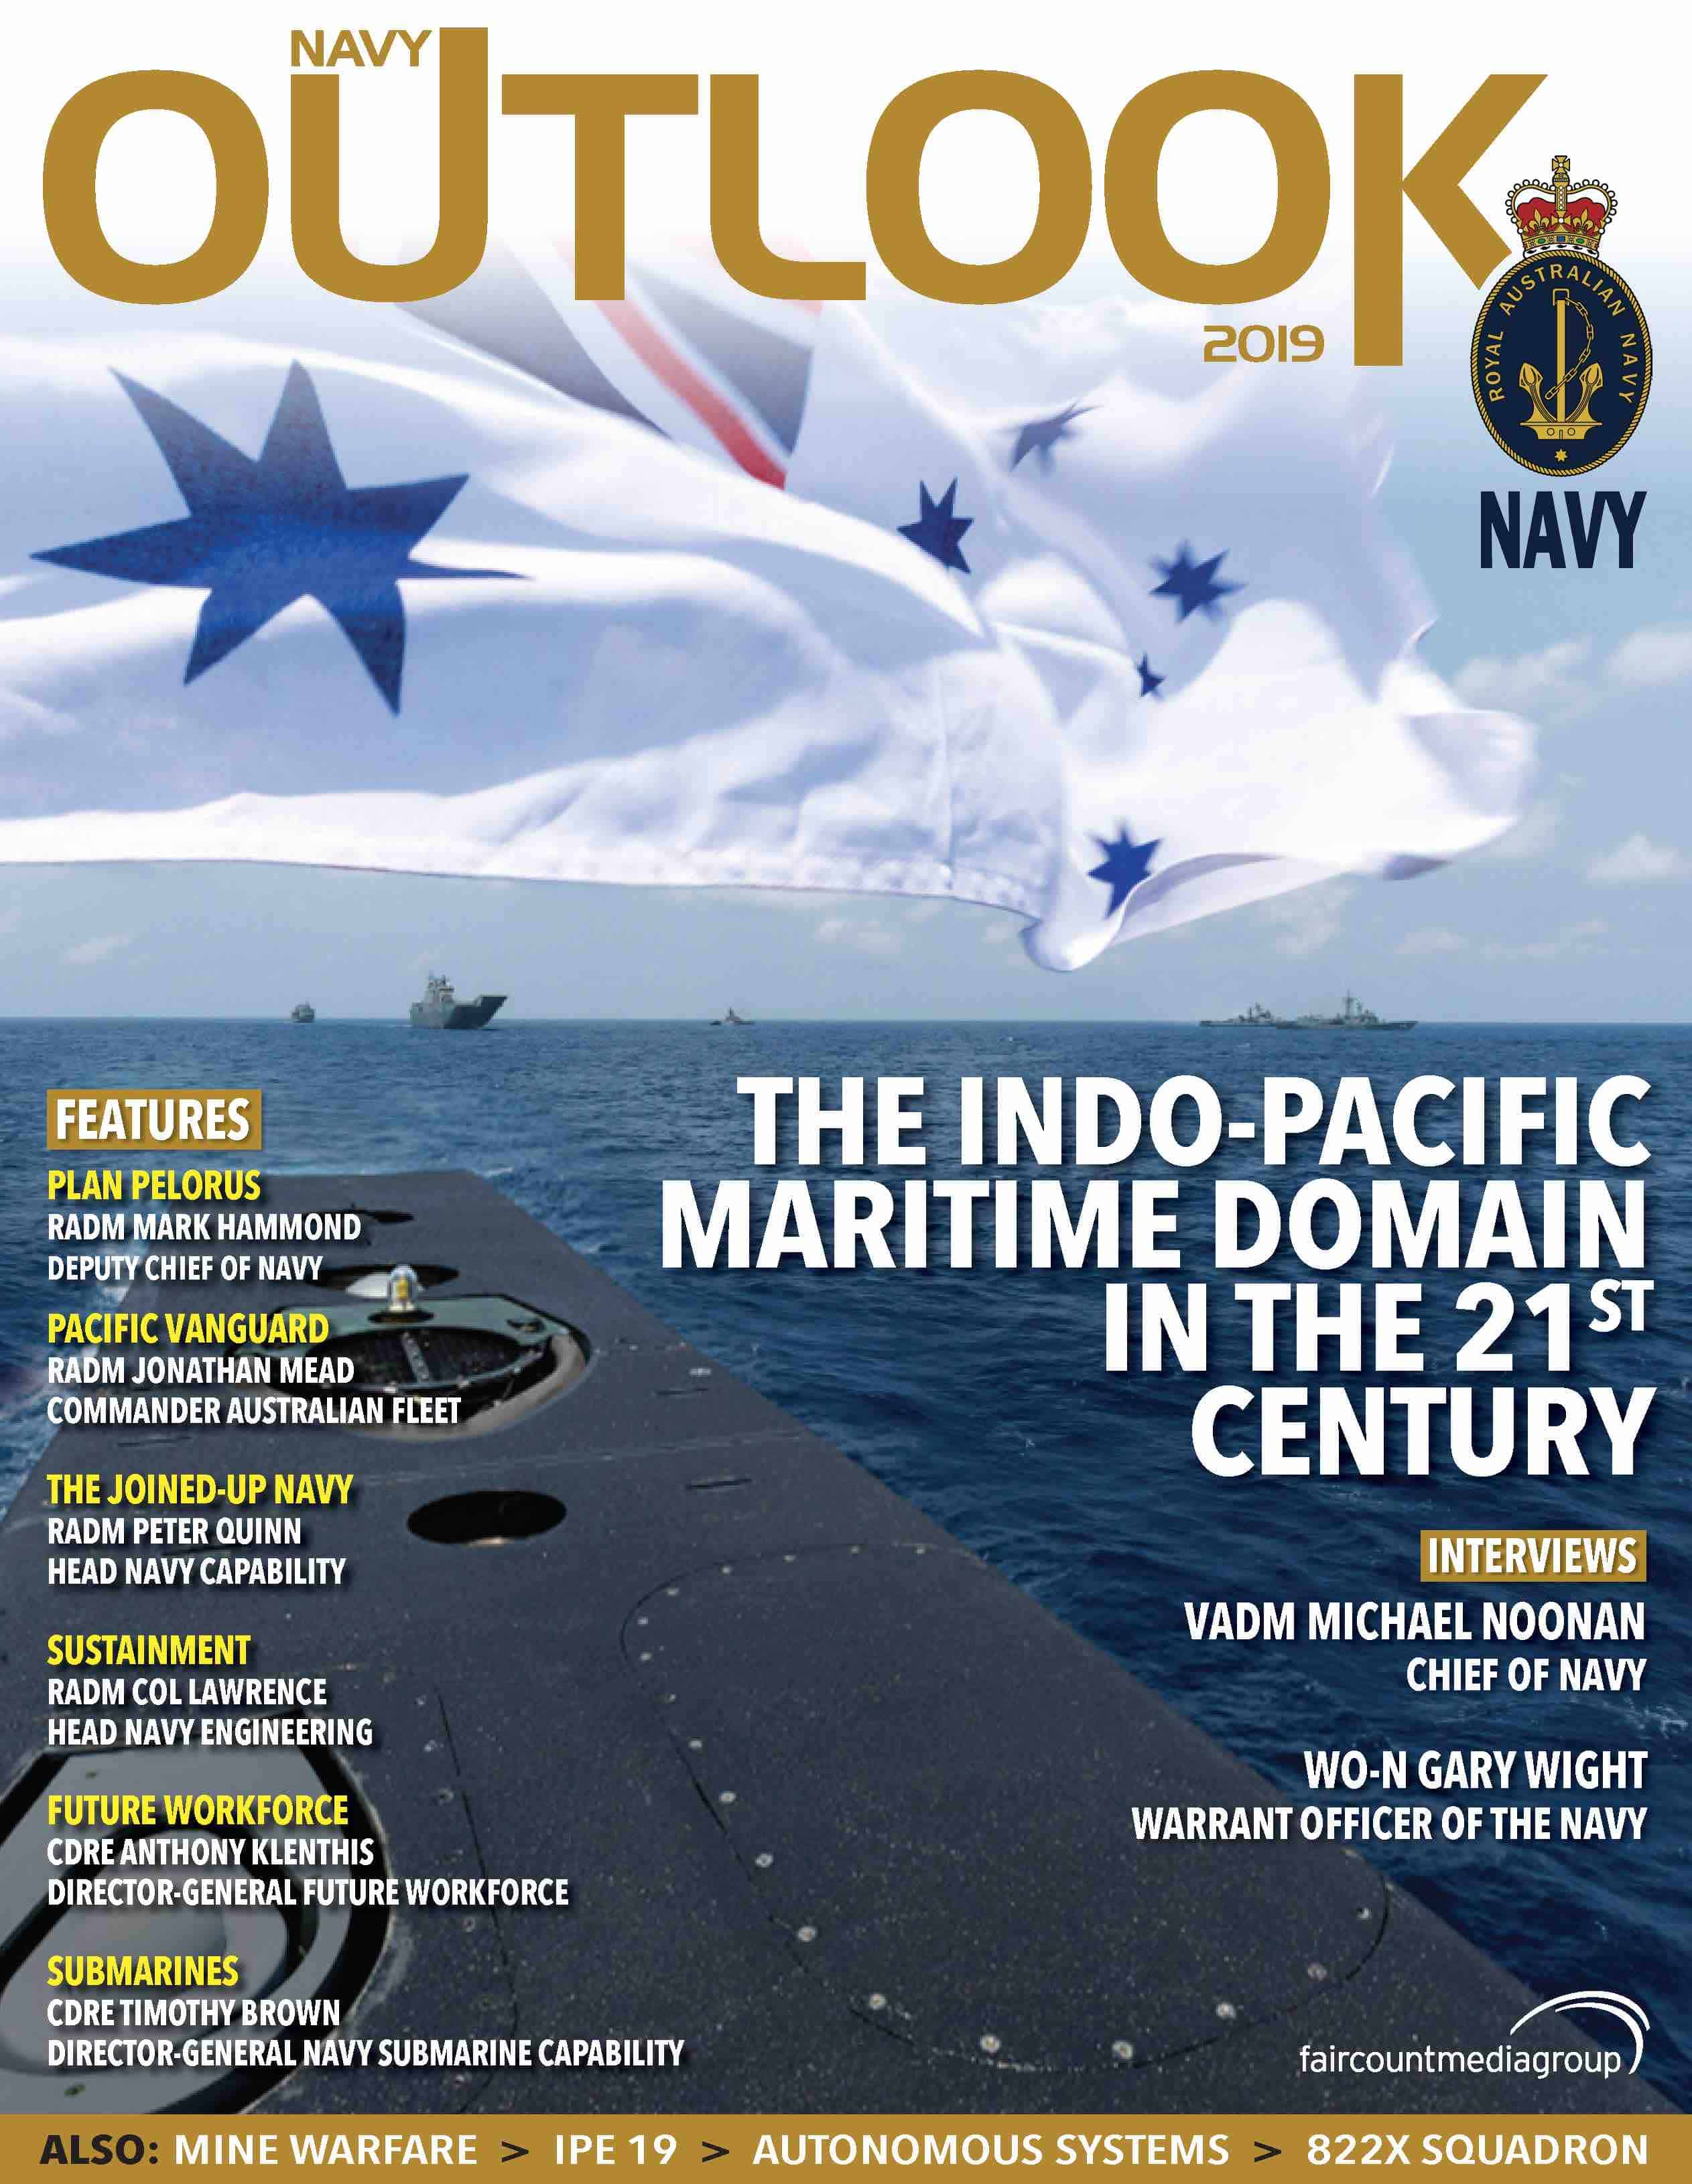 Navy Outlook 2019 cover